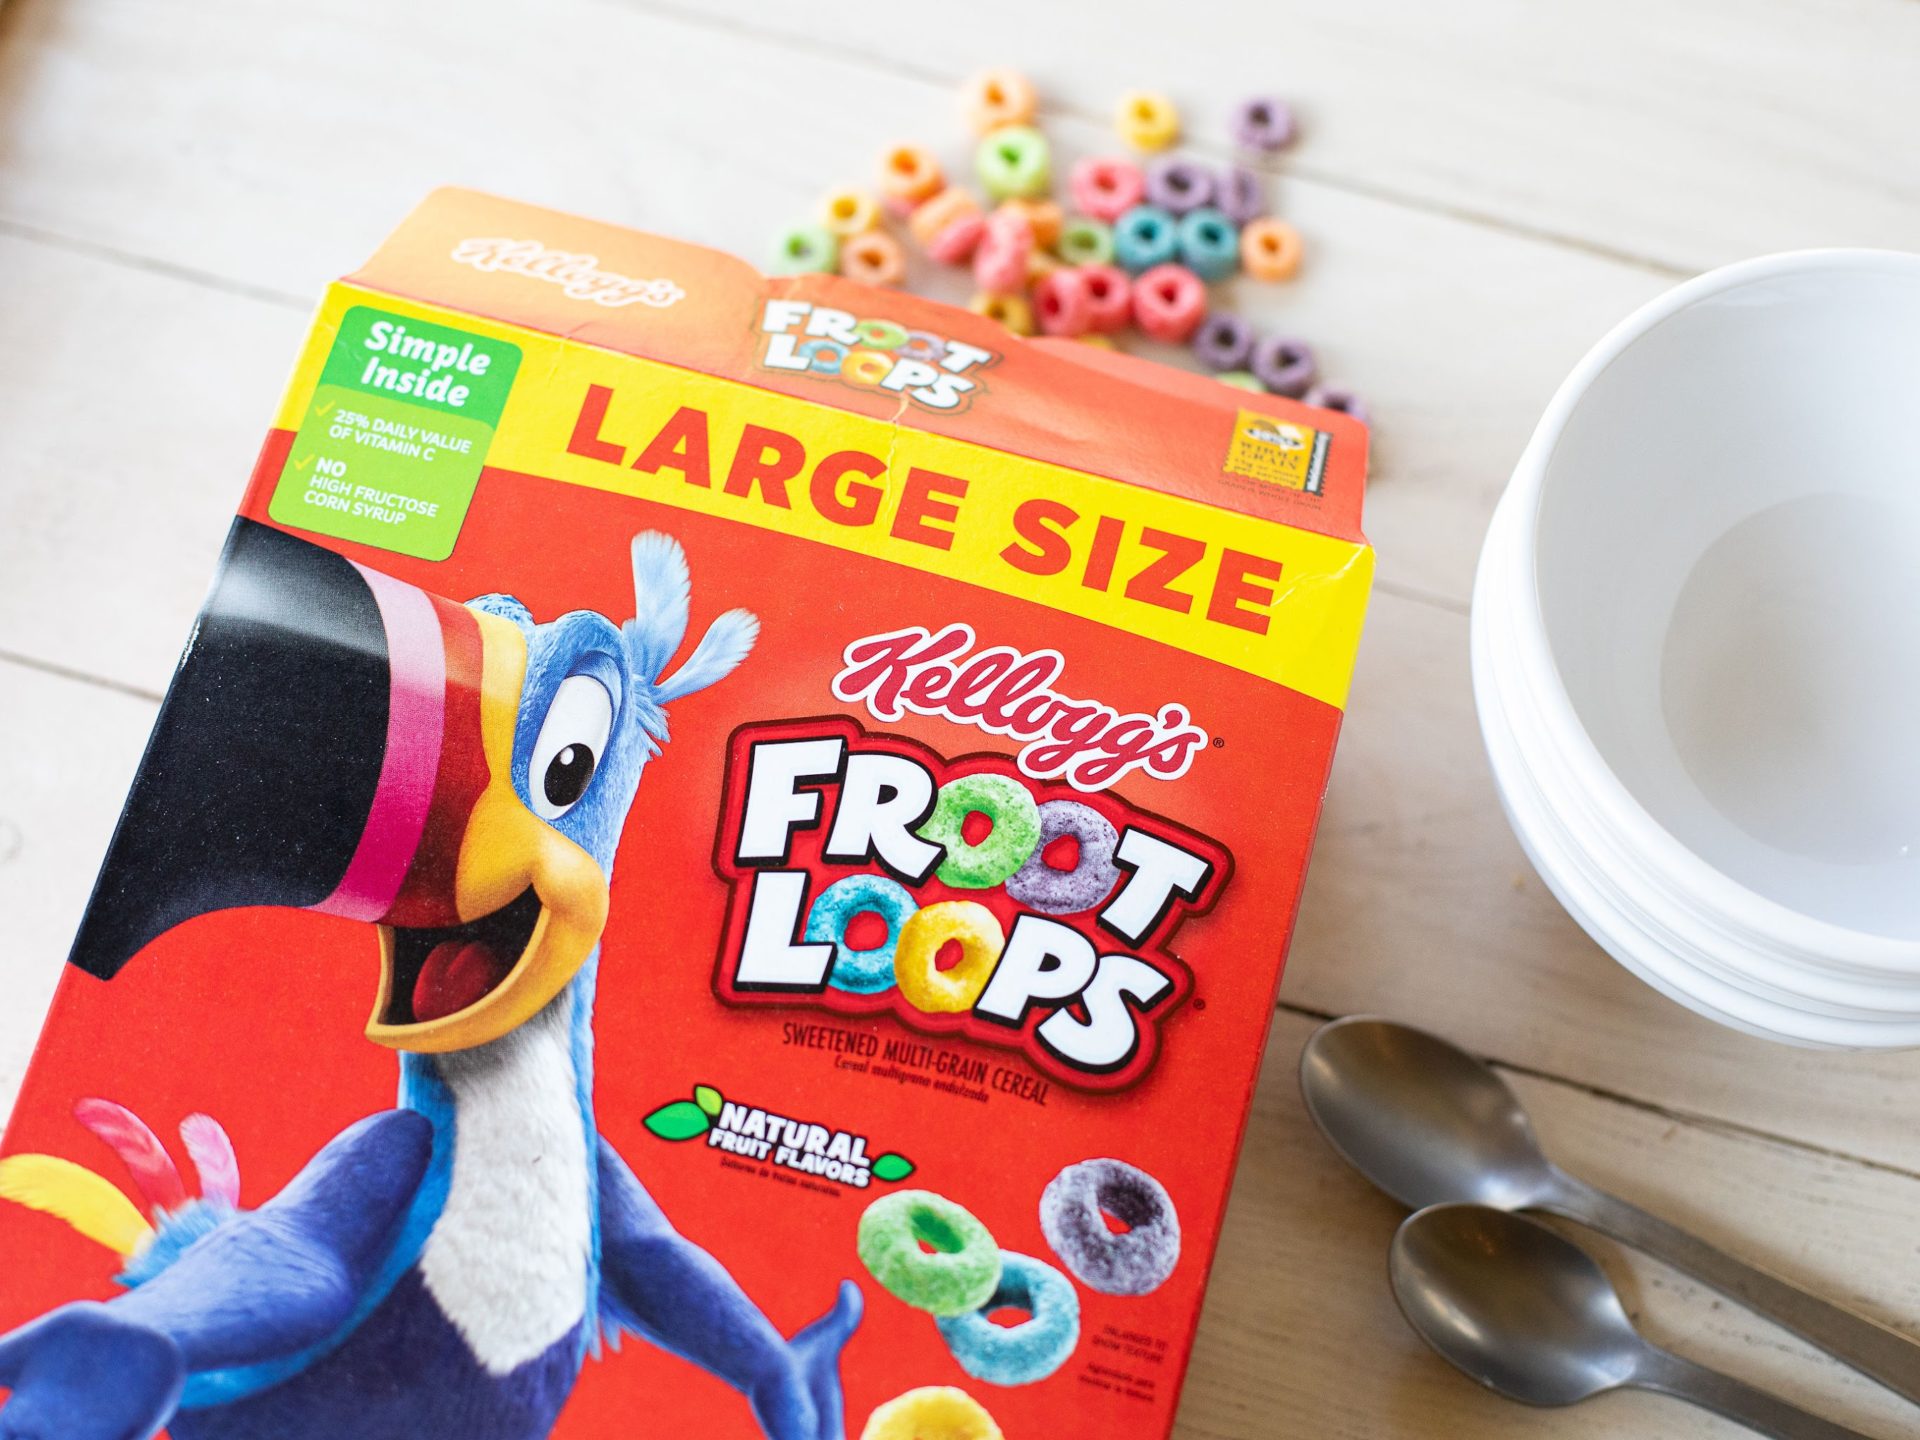 Large Size Boxes Of Kellogg’s Cereal As Low As $1.99 At Kroger